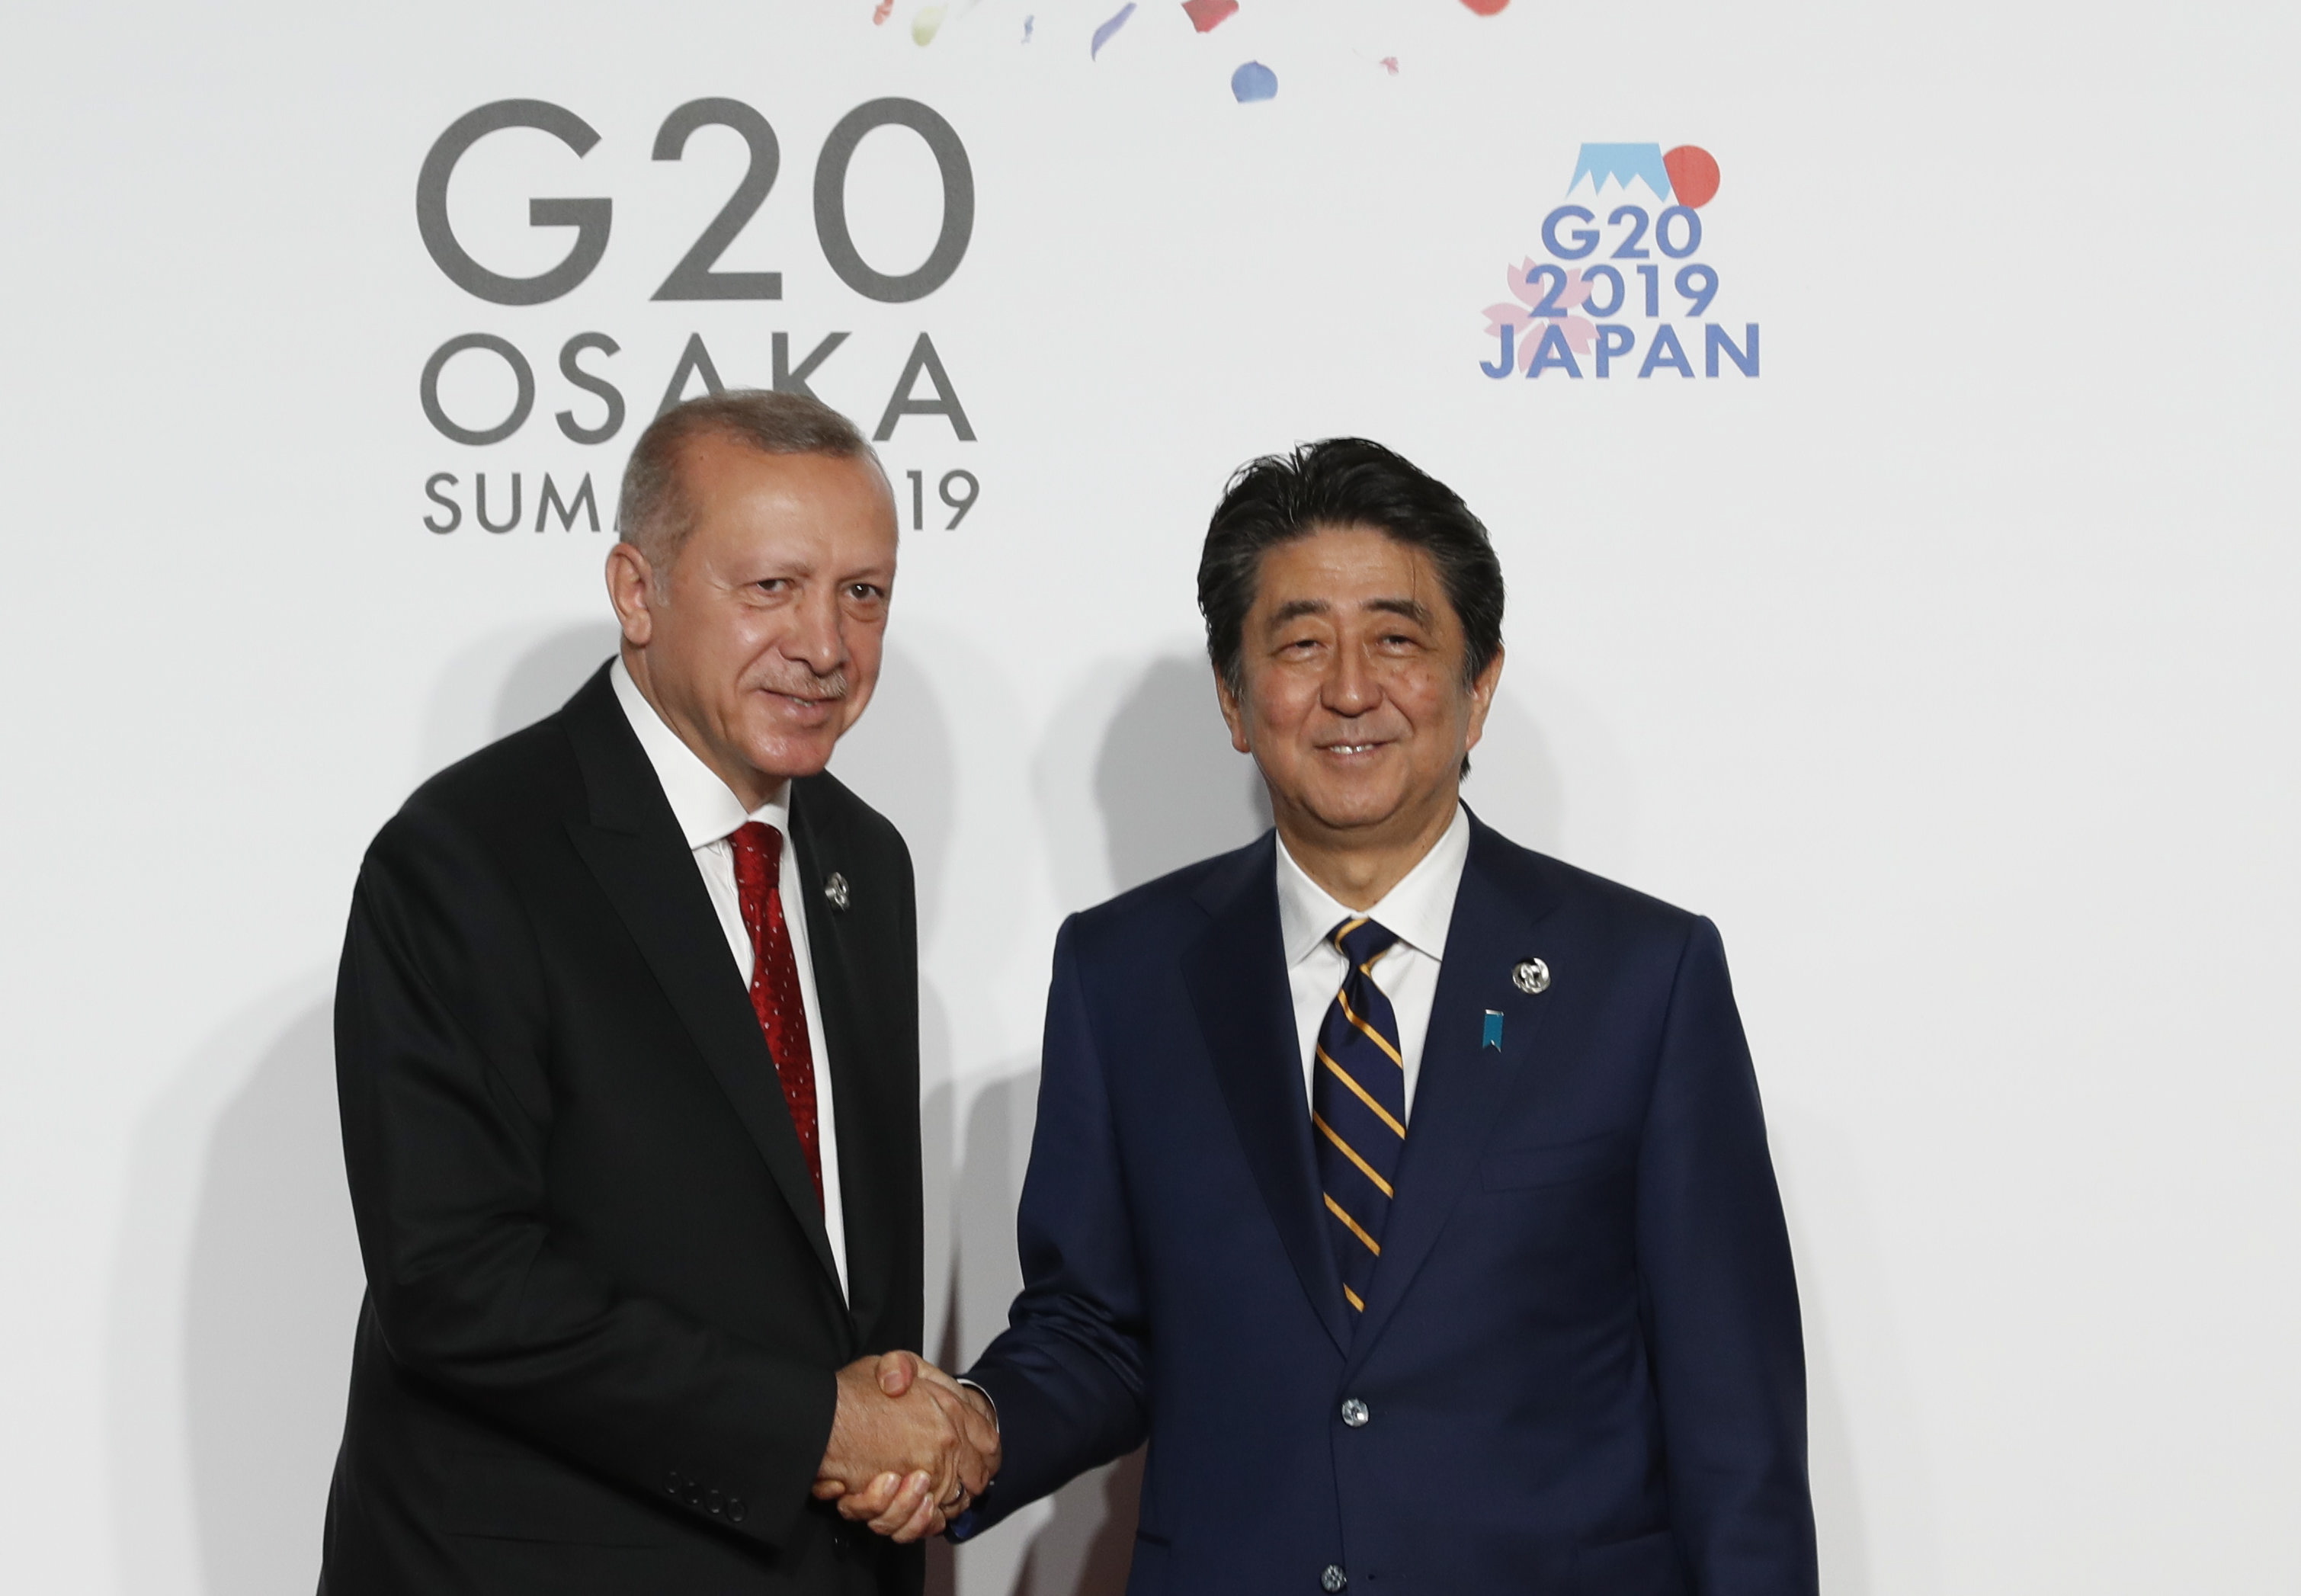 epa07678977 Turkish President Tayyip Erdogan (L) is welcomed by Japanese Prime Minister Shinzo Abe (R) upon his arrival for a welcome ceremony on the first day of the G20 summit in Osaka, Japan, 28 June 2019. It is the first time Japan hosts a G20 summit. The summit gathers leaders from 19 countries and the European Union to discuss topics such as global economy, trade and investment, innovation and employment.  EPA/KIM KYUNG HOON / POOL